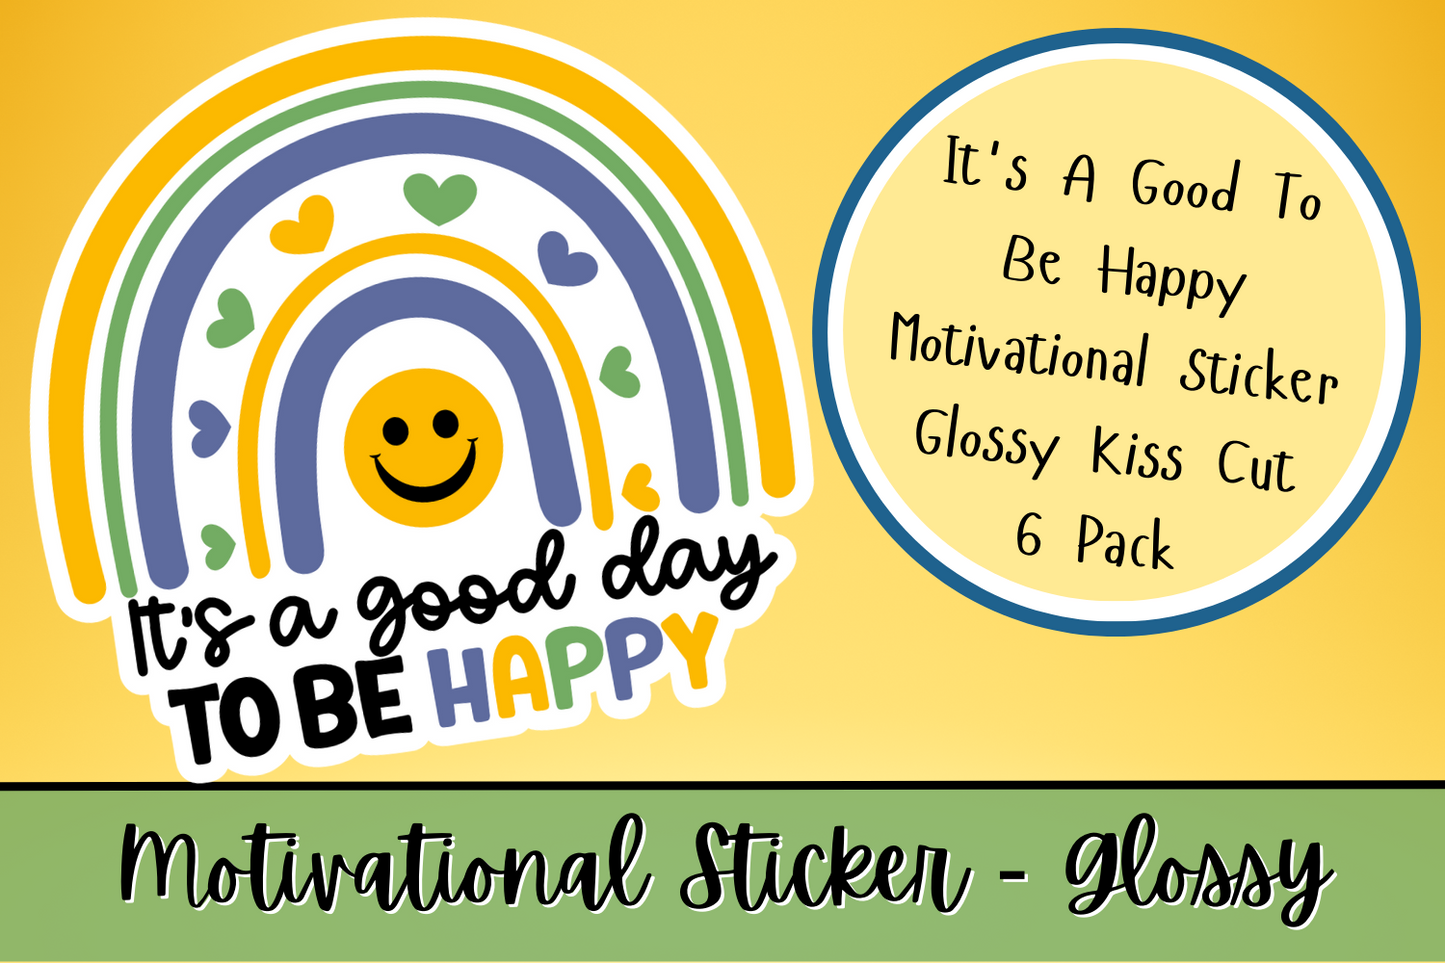 It's A Good Day To Be Happy Stickers - Glossy